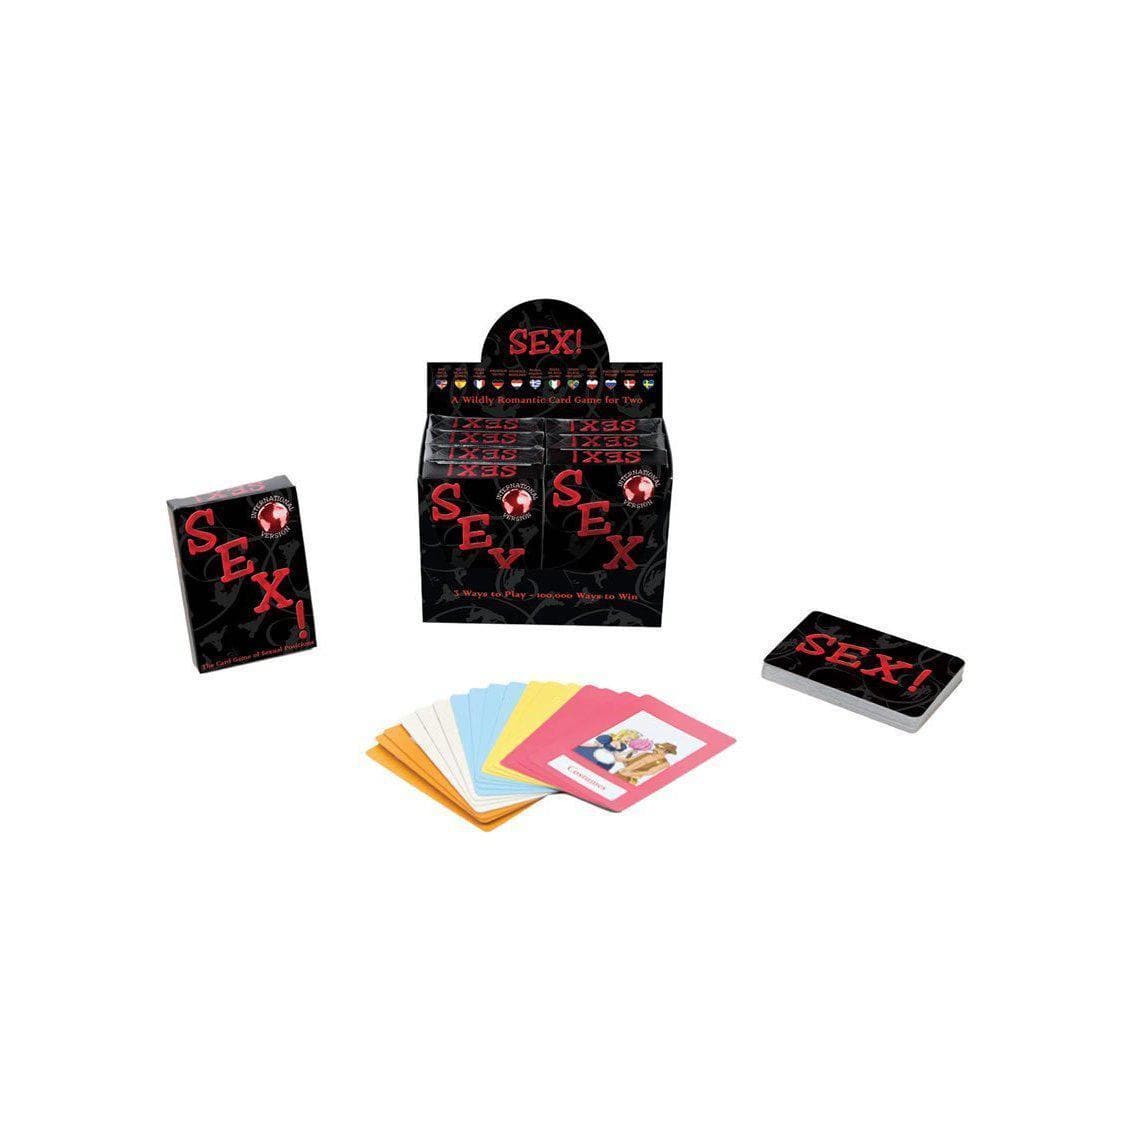 International Sex! Card Game For Fun Loving Couples - Romantic Blessings